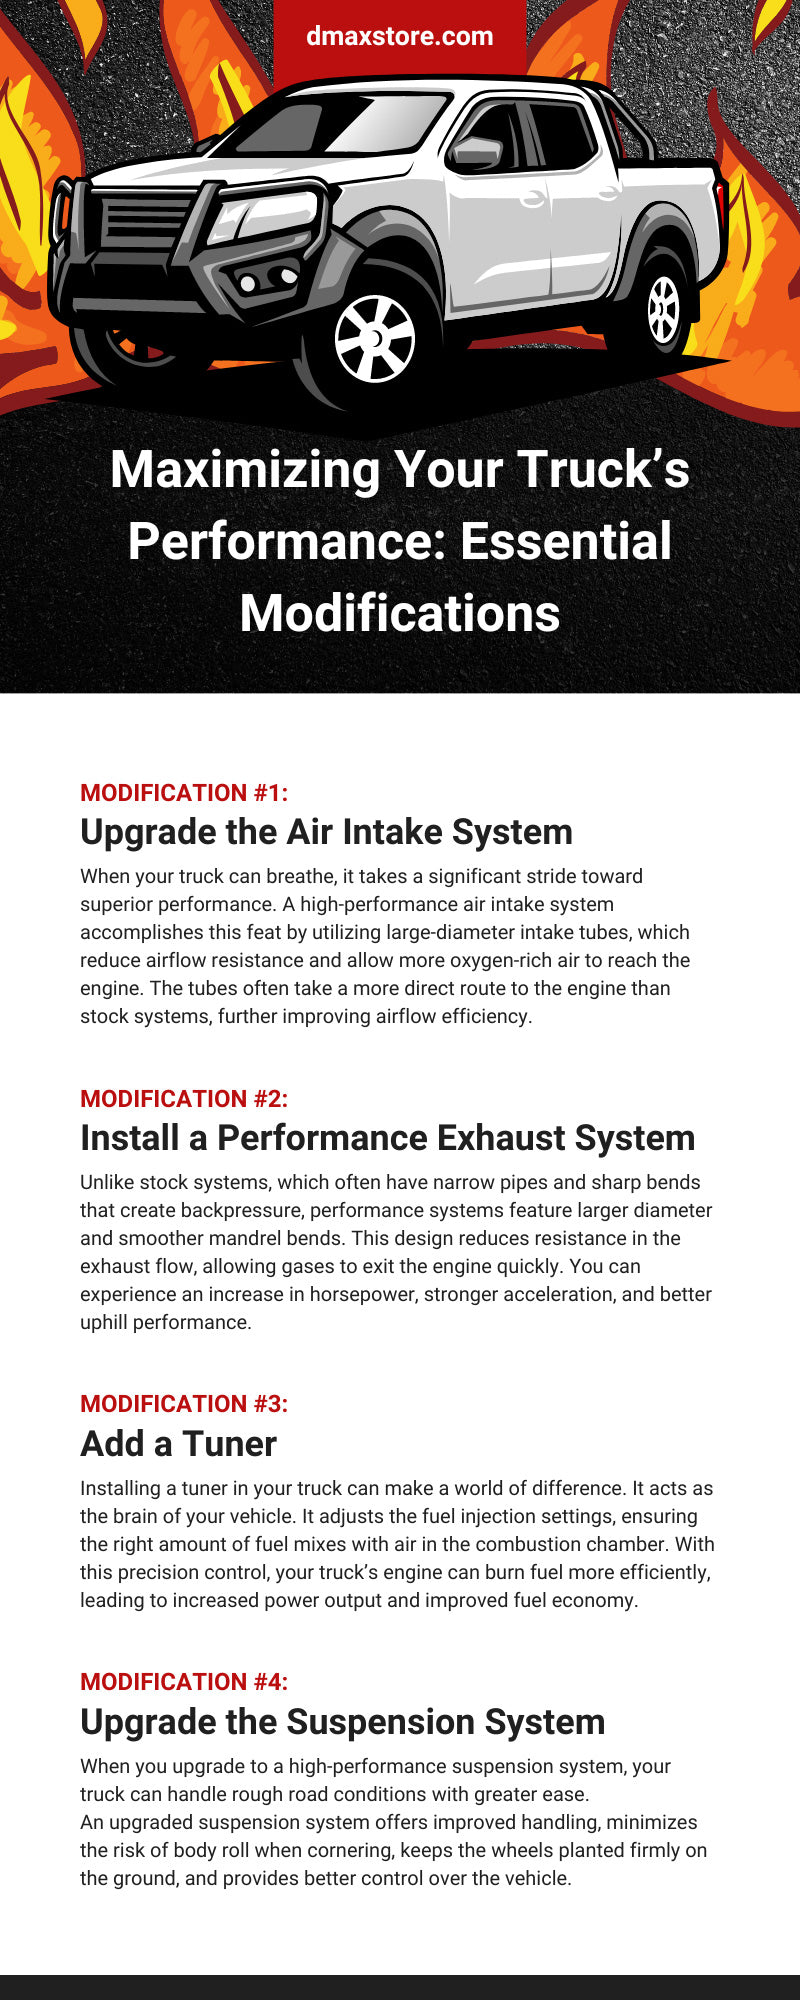 Maximizing Your Truck’s Performance: Essential Modifications